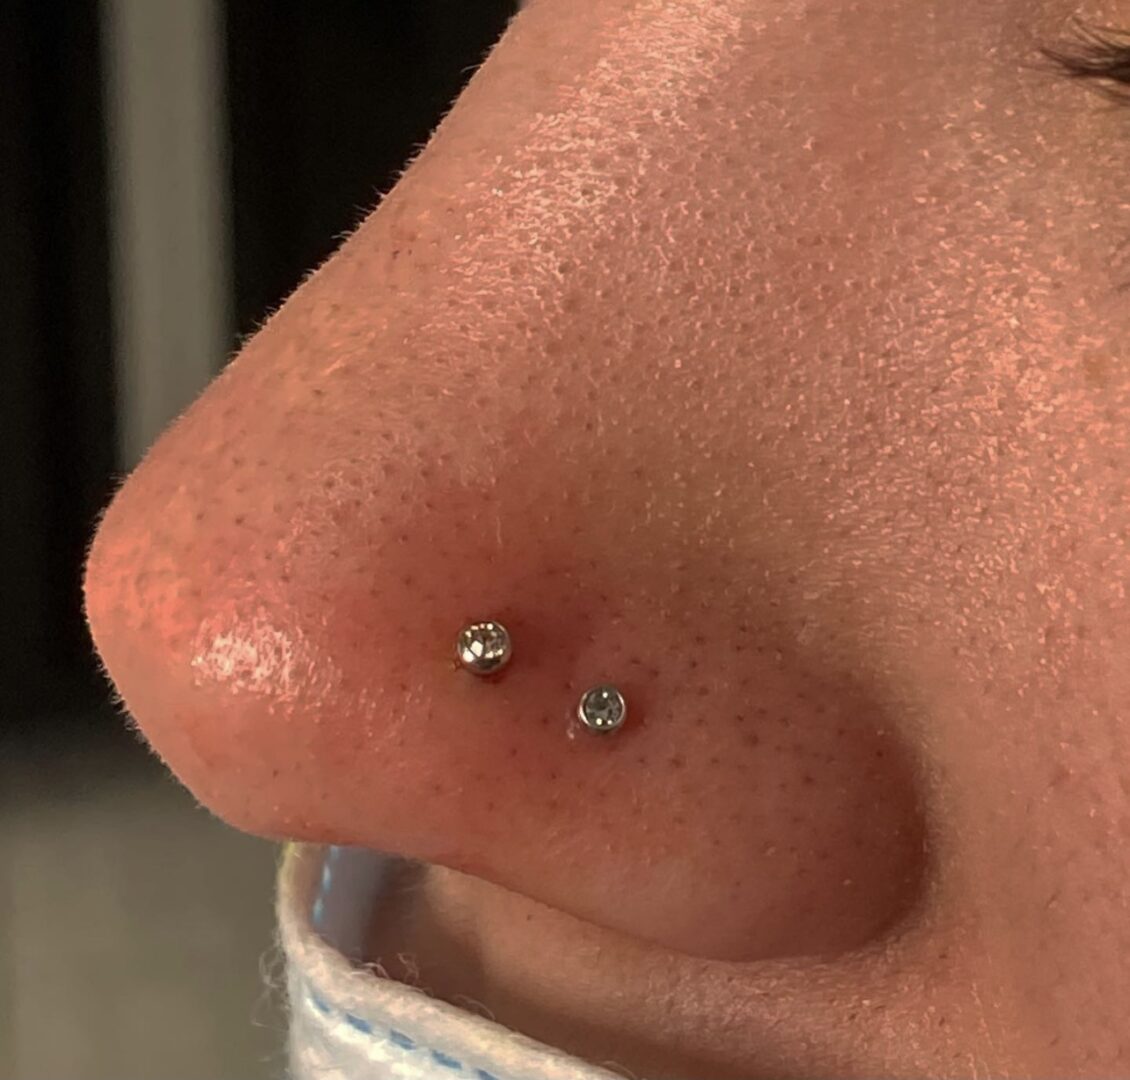 A close up of a person 's nose with a piercing